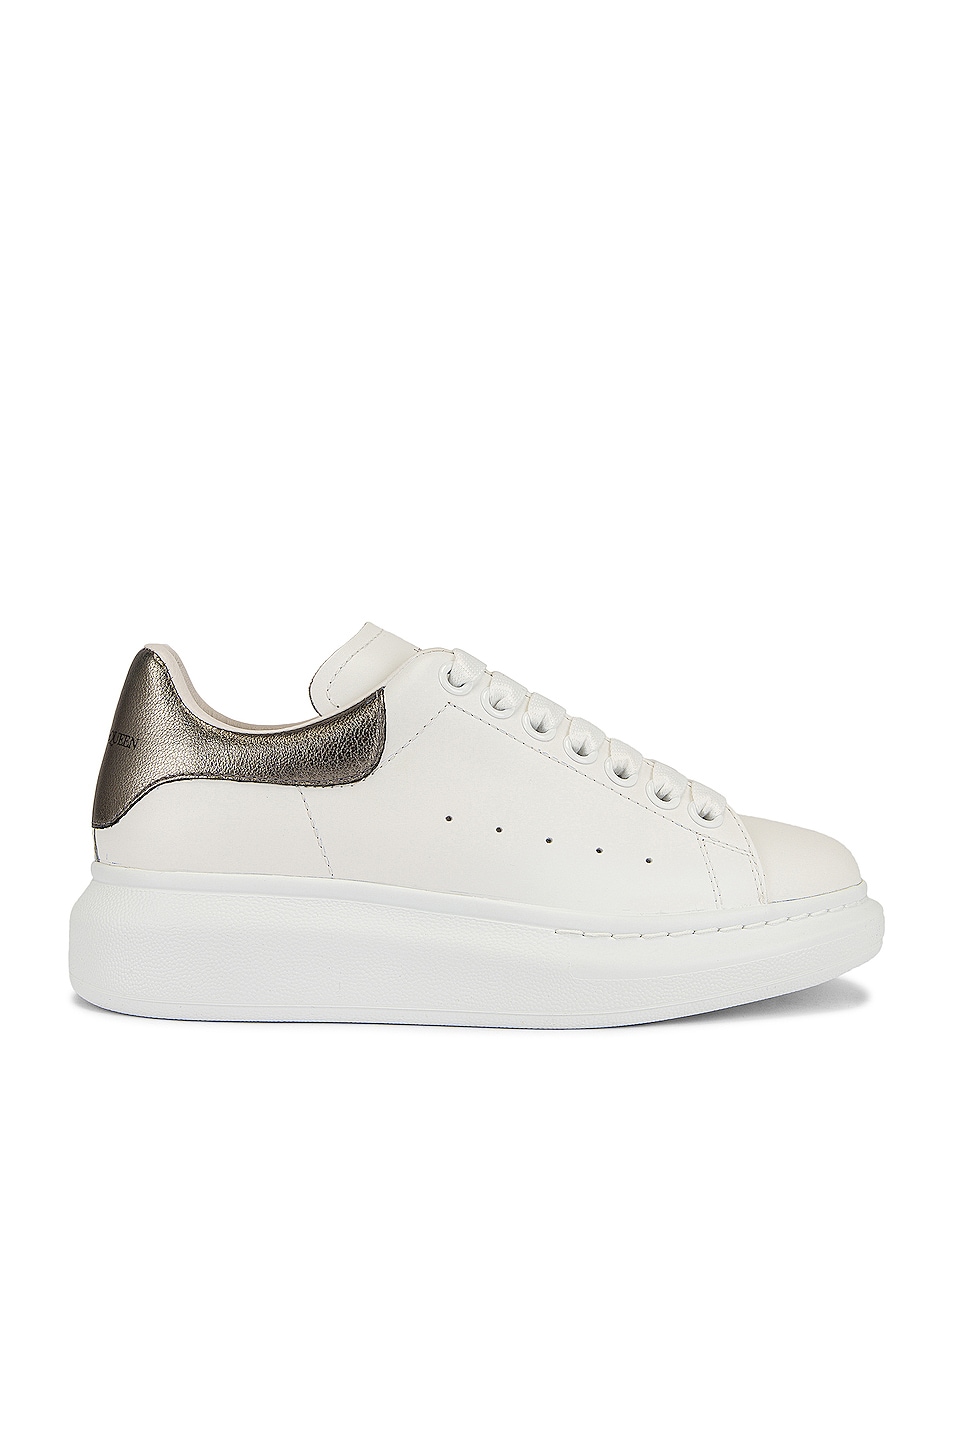 Image 1 of Alexander McQueen Leather Platform Sneakers in White & Grey